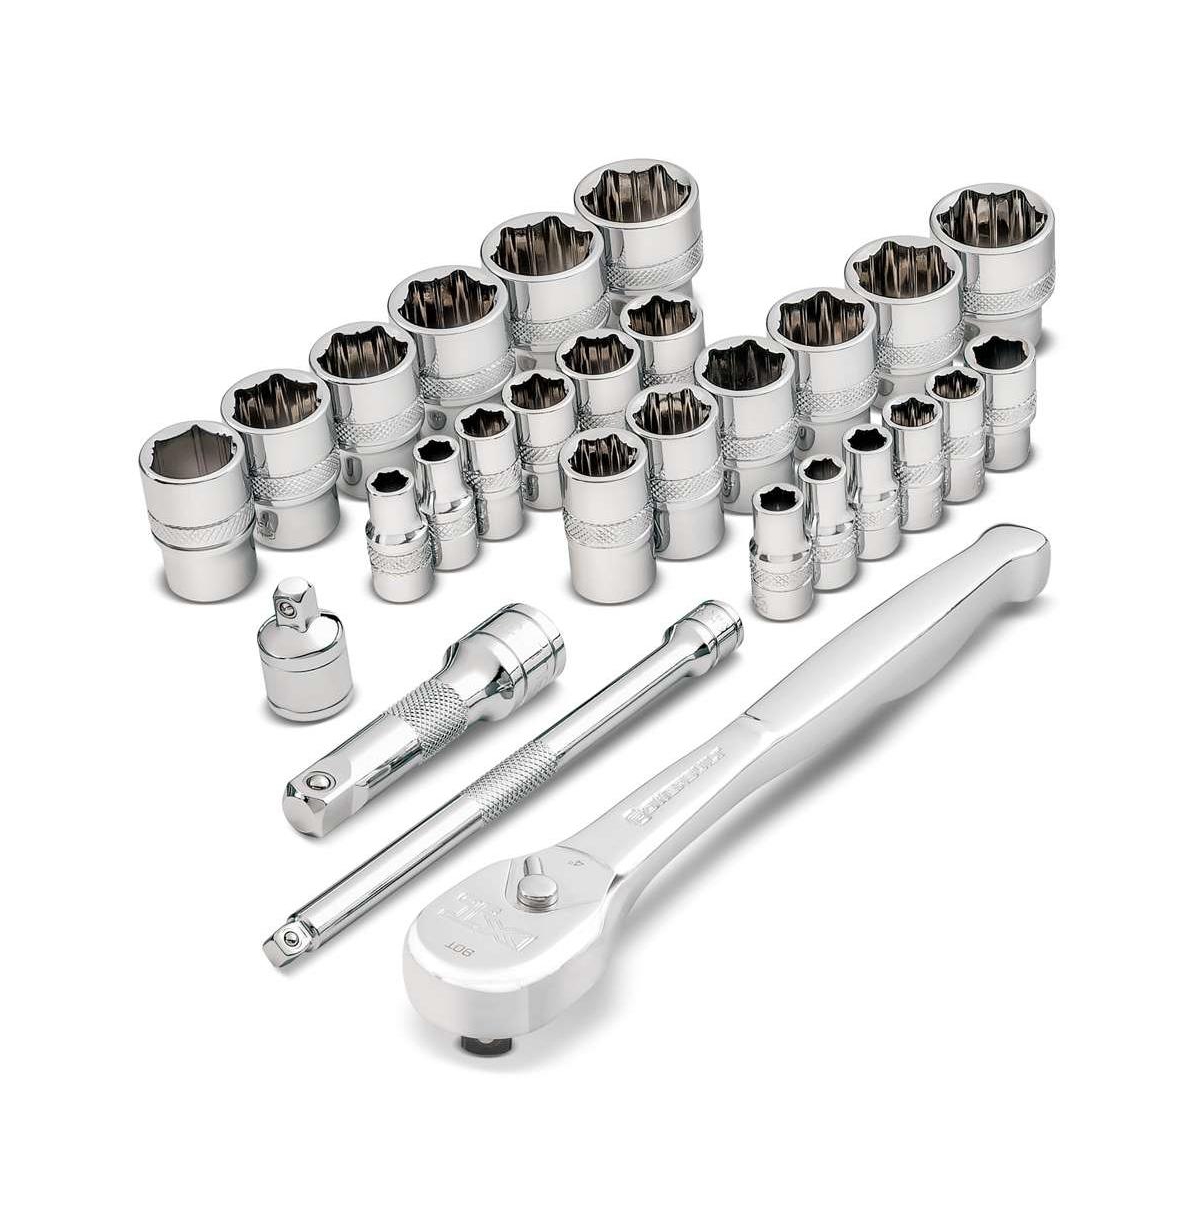 28 Piece Zeon Socket Set for Damaged Bolts with Ratchet - Silver